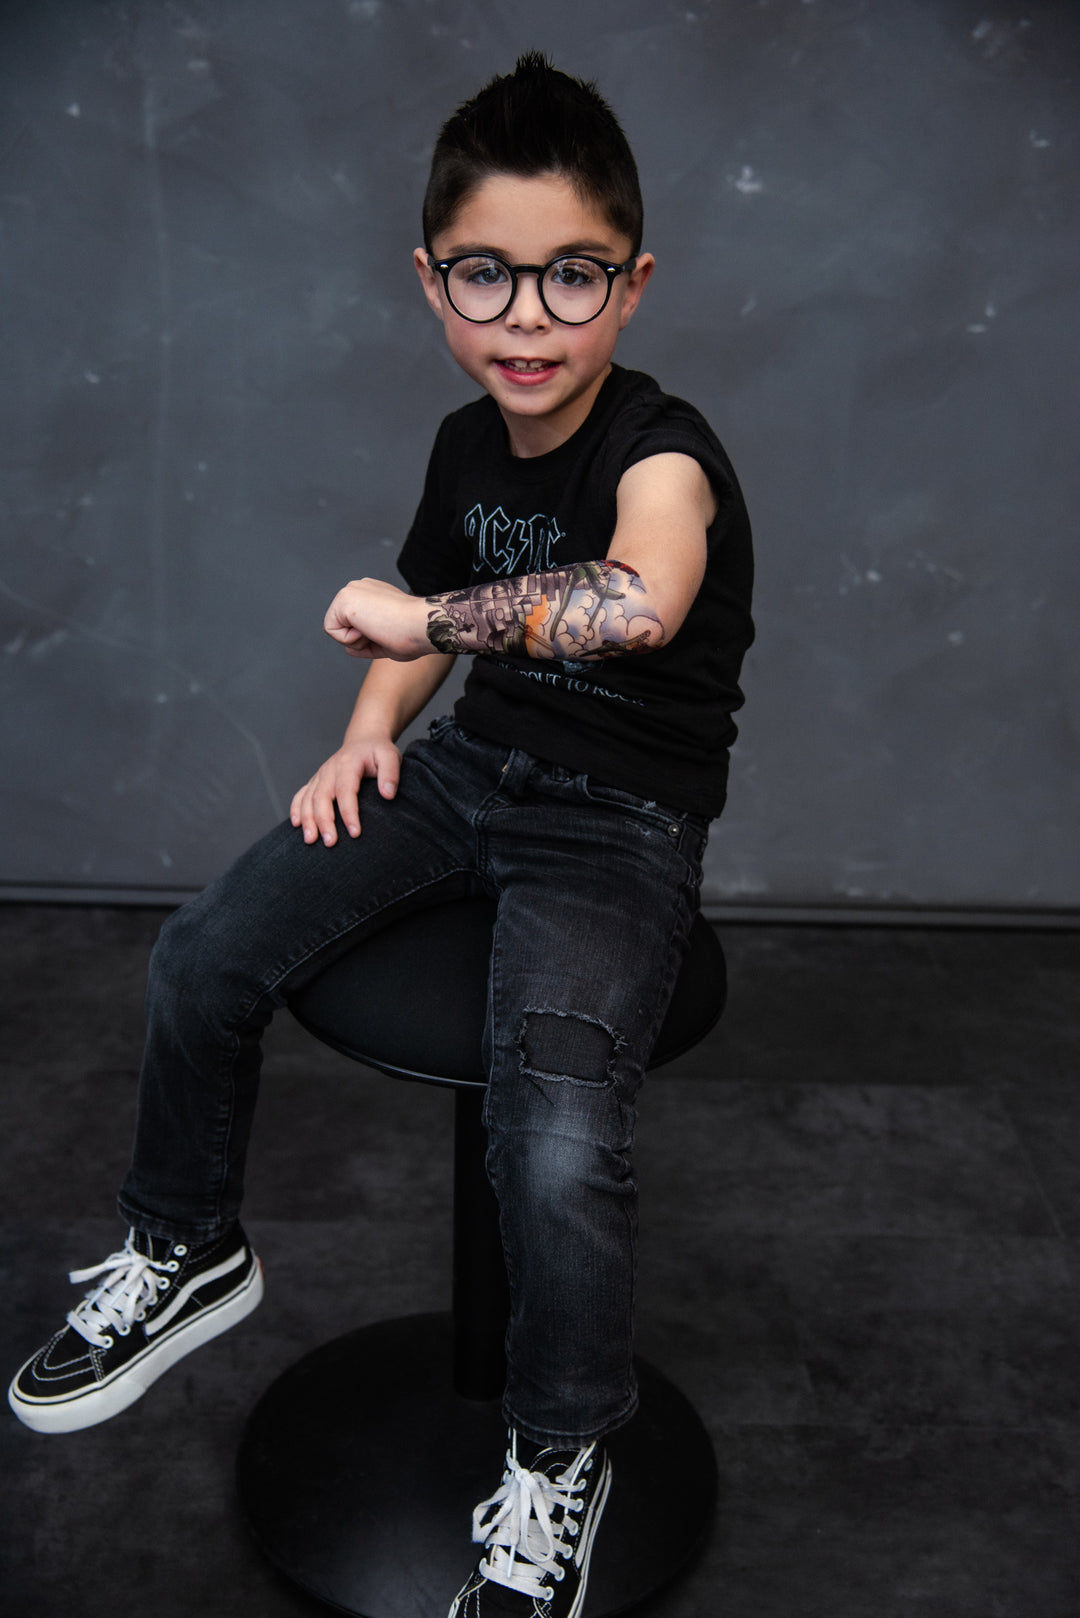 Little boy showing off his military themed temporary tattoo on his forearm.